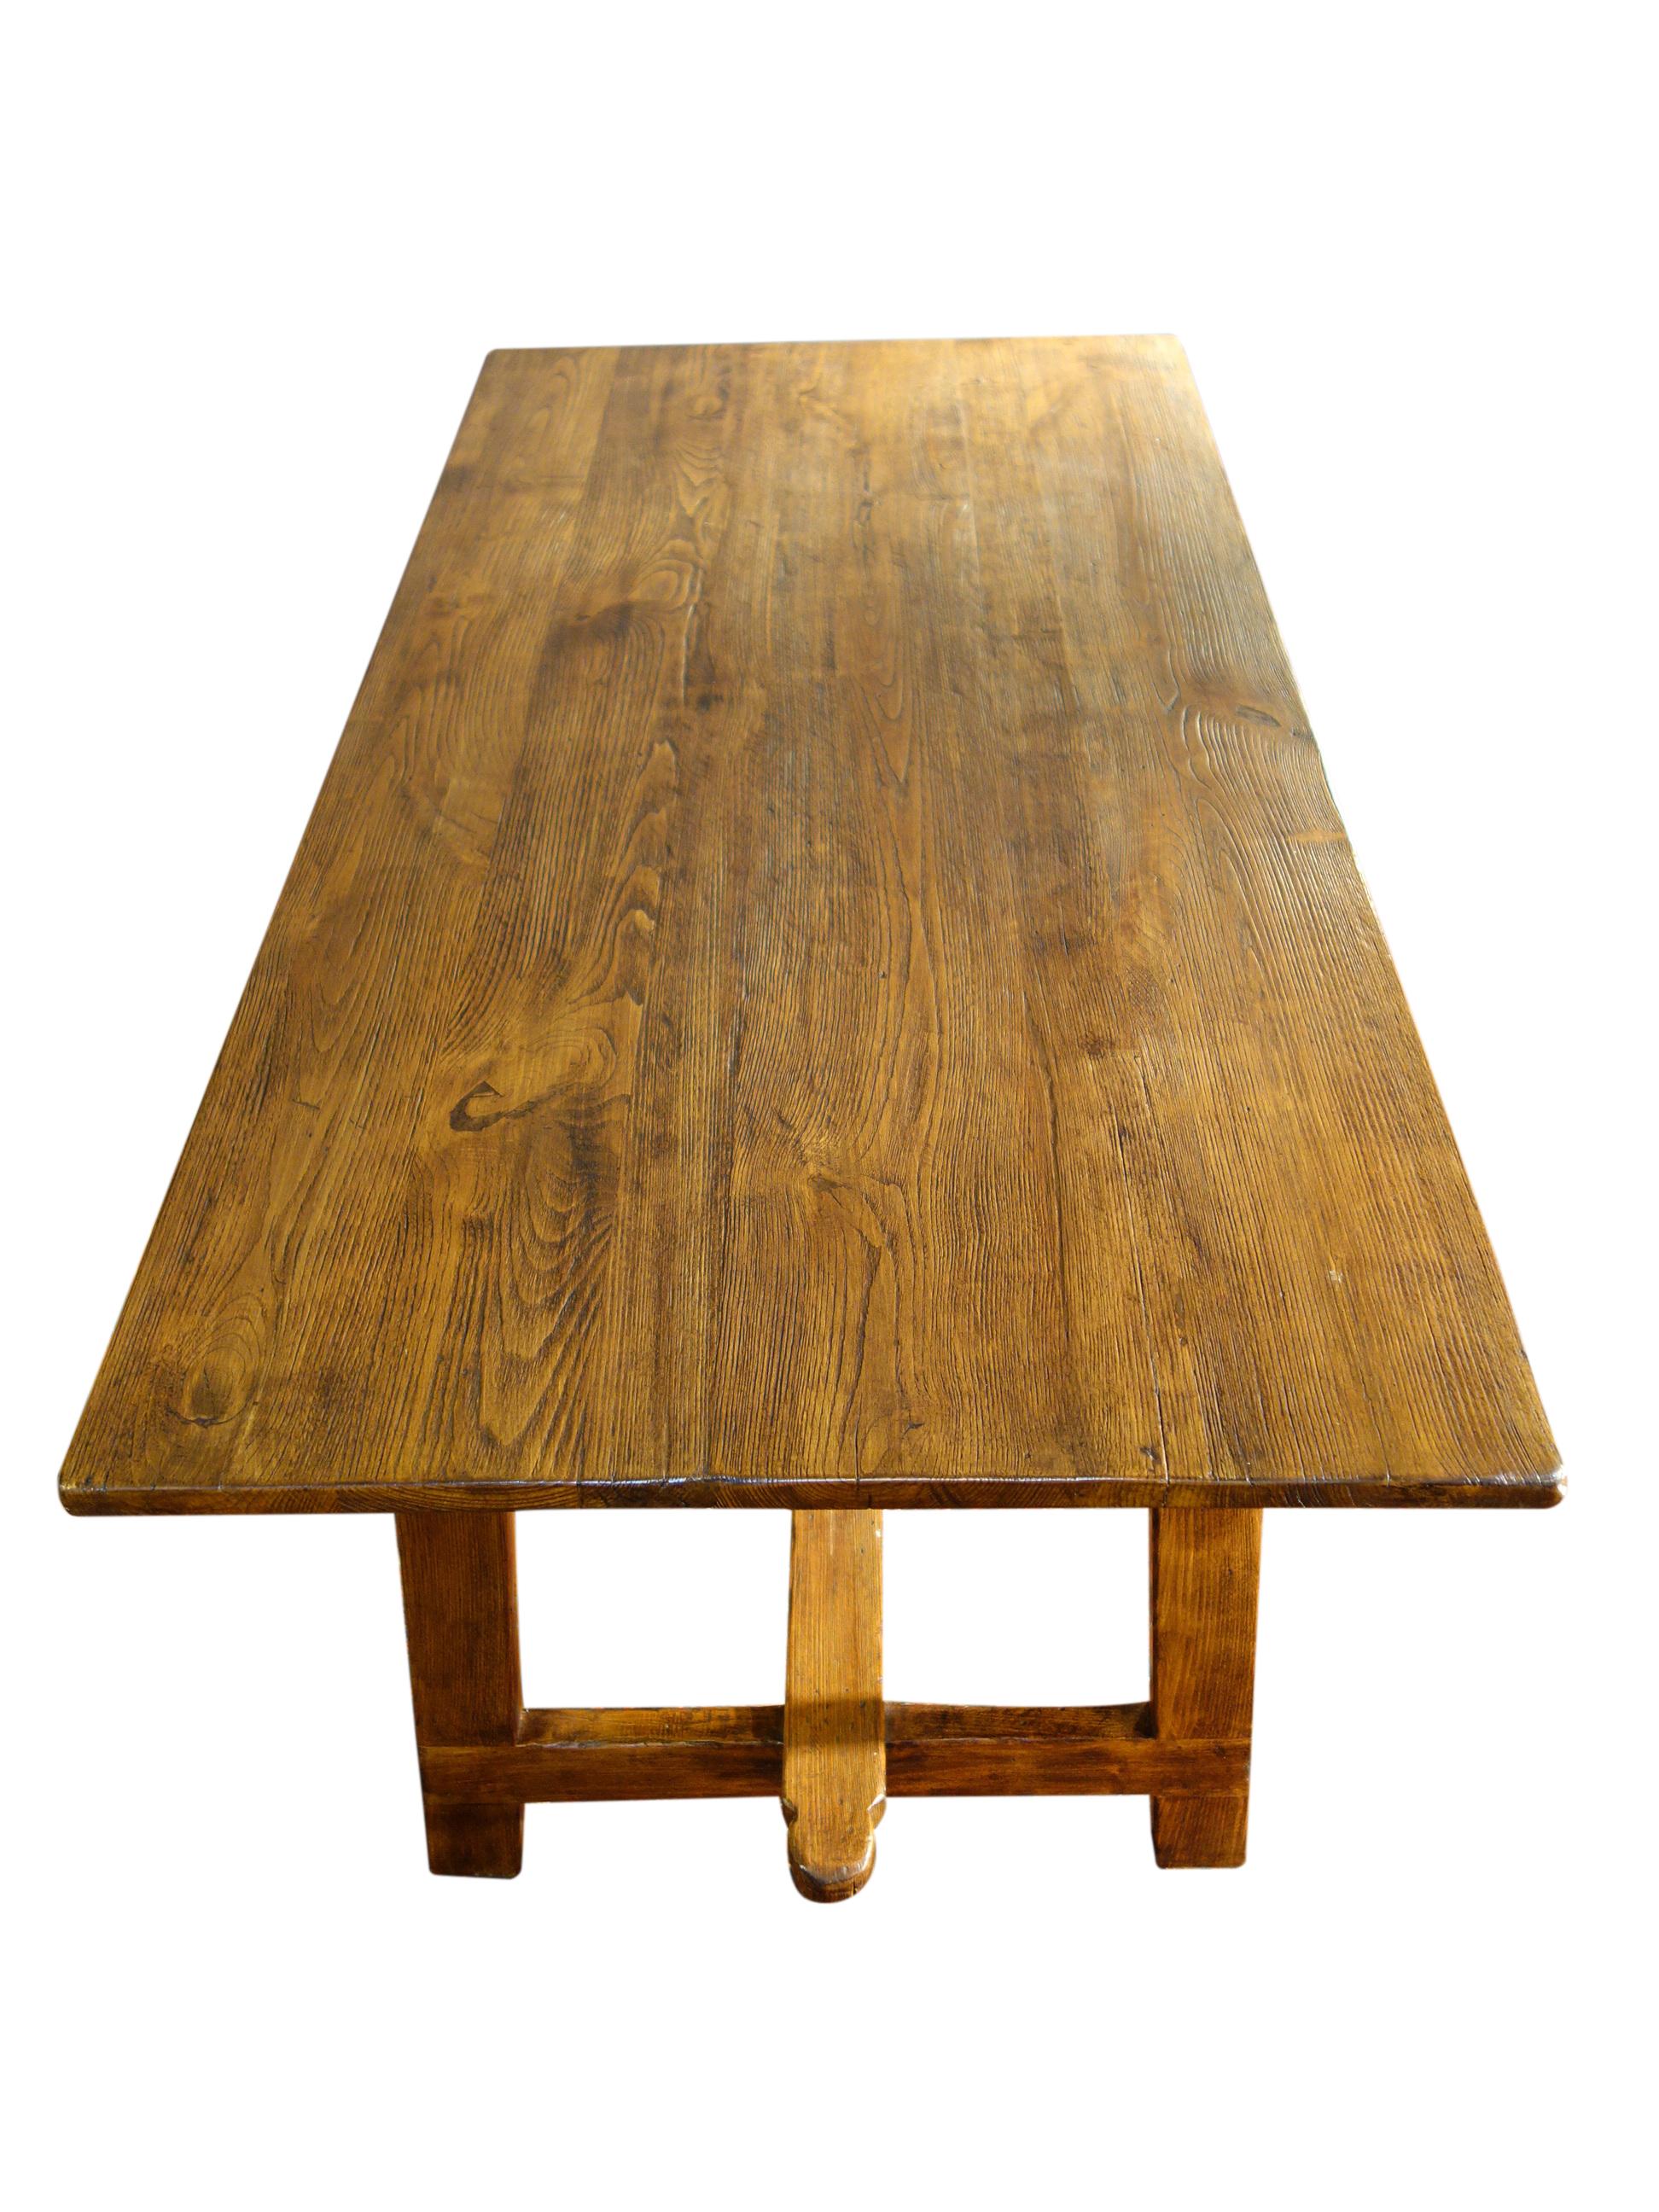 17th C Italian Refectory Style Solid Chestnut CAPRETTA Table with dining options For Sale 8